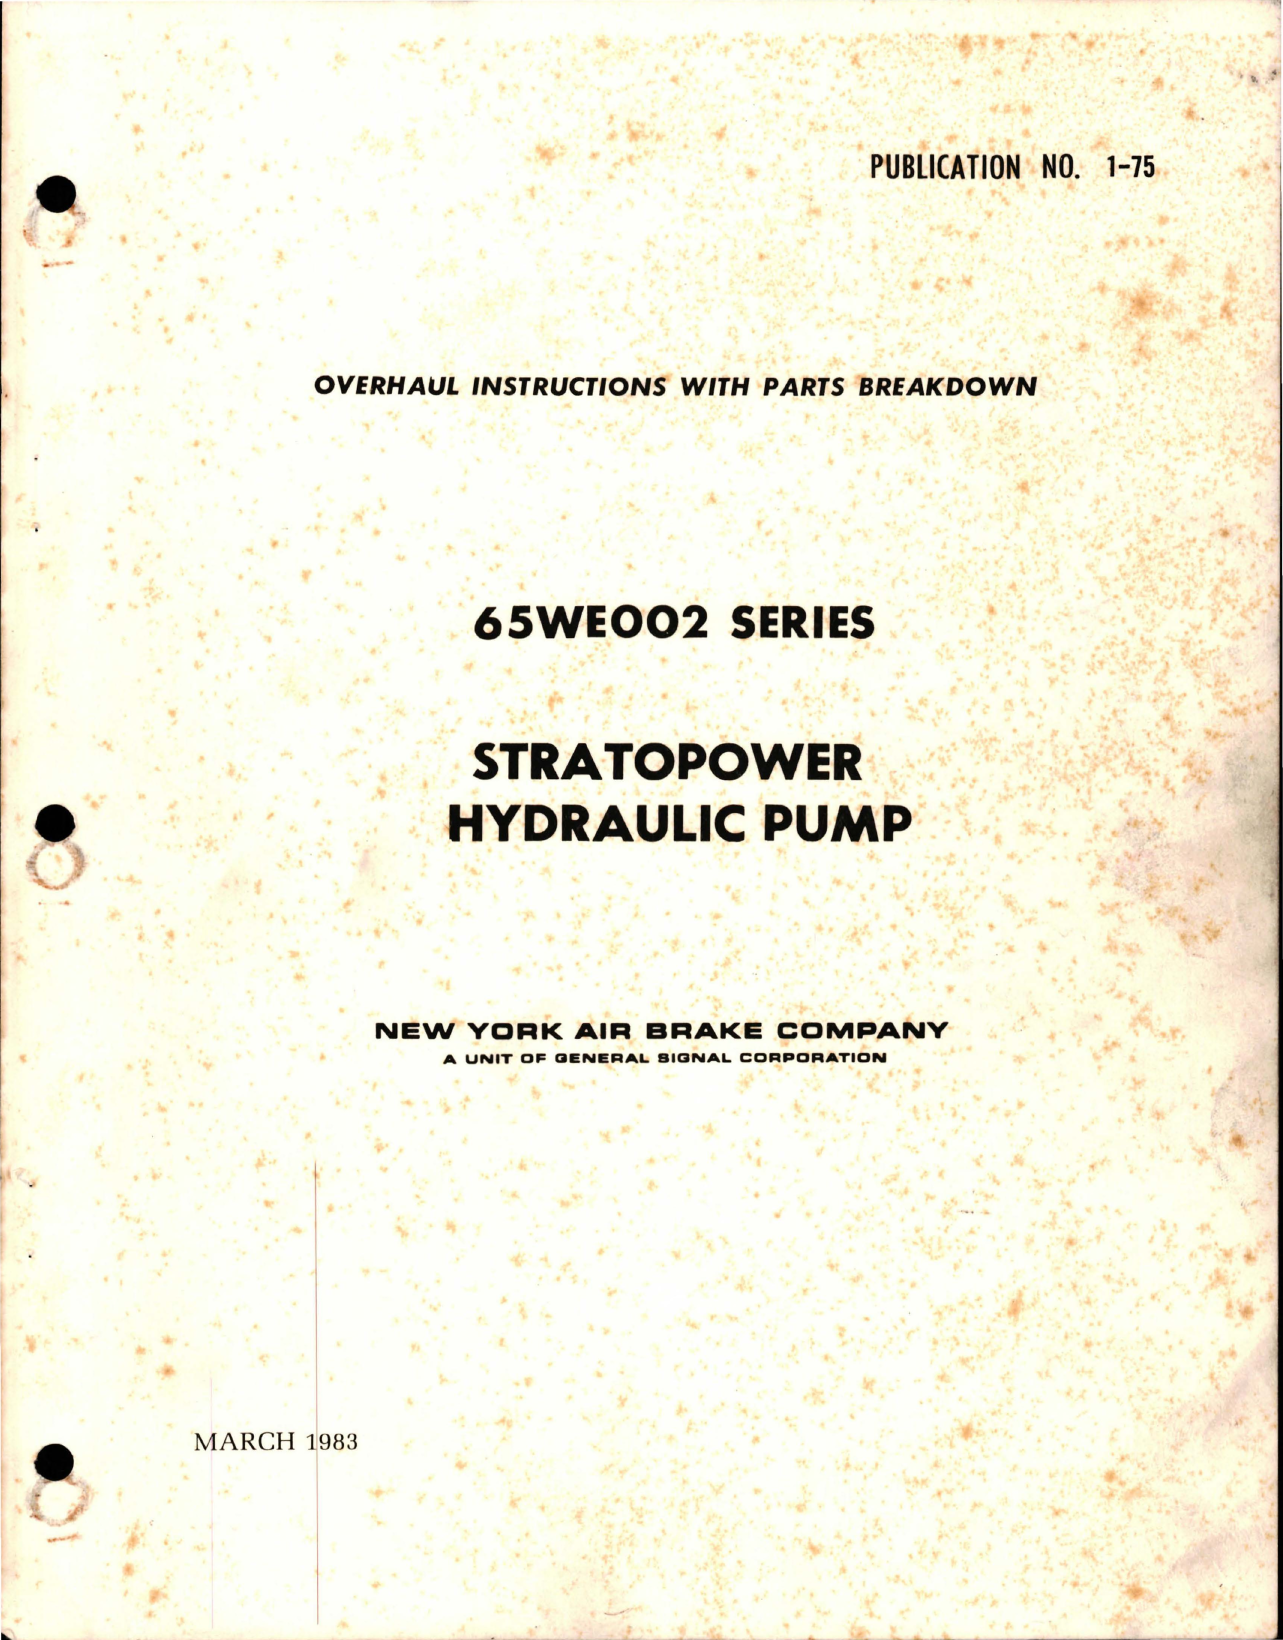 Sample page 1 from AirCorps Library document: Overhaul Instructions with Parts for Stratopower Hydraulic Pump - 65WE002 Series